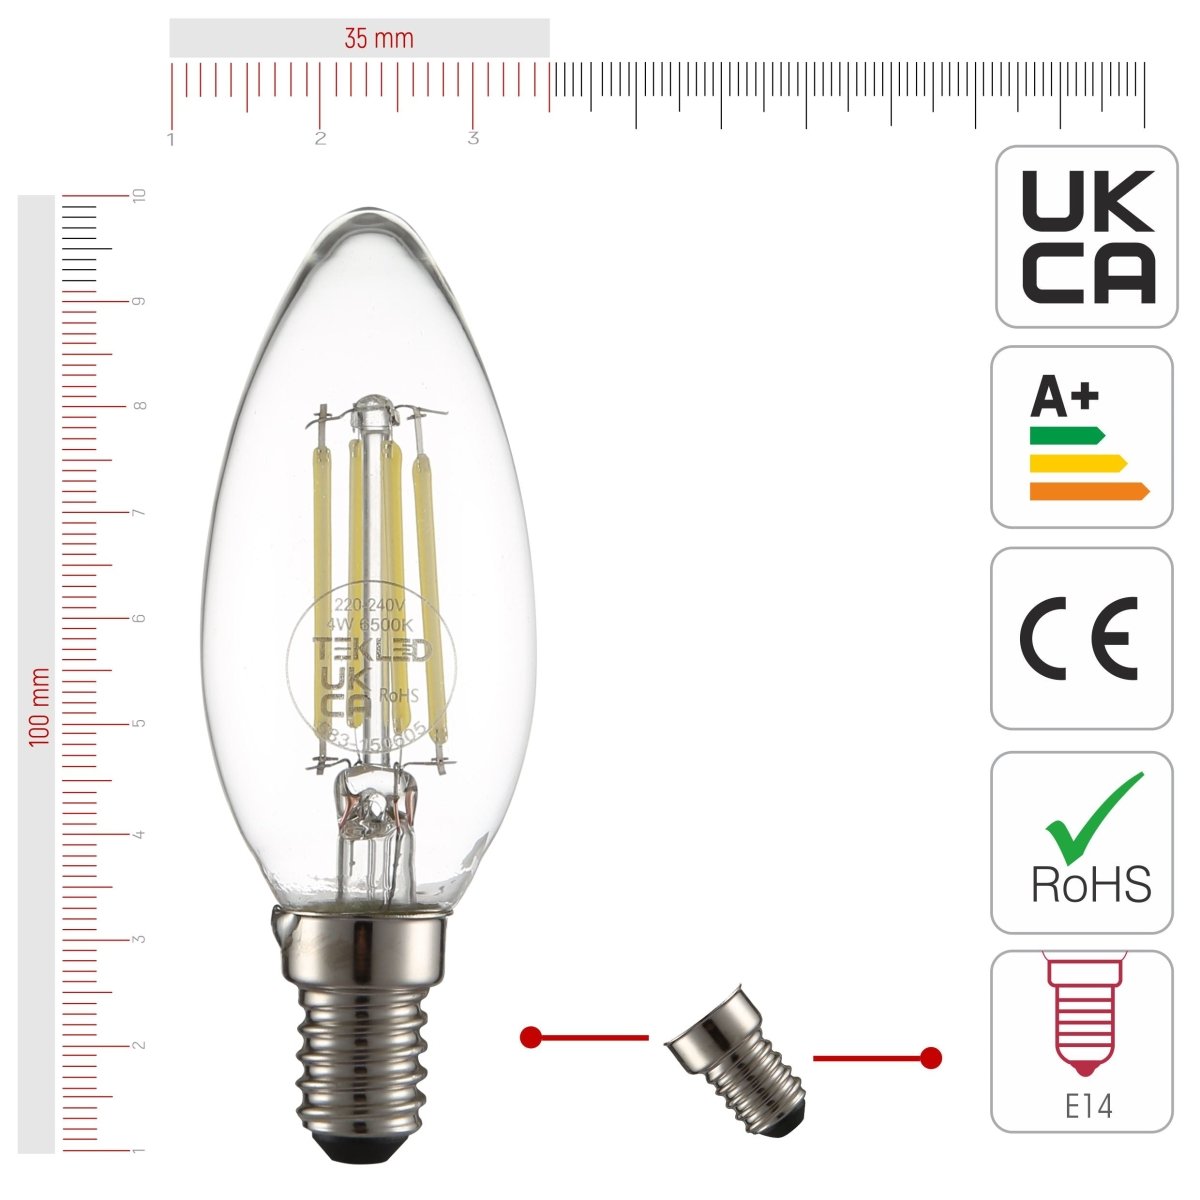 Size and certifications of LED Filament Bulb C35 Candle E14 Small Edison Screw 4W 470lm Cool Daylight 6500K Clear Pack of 6 | TEKLED 583-150605